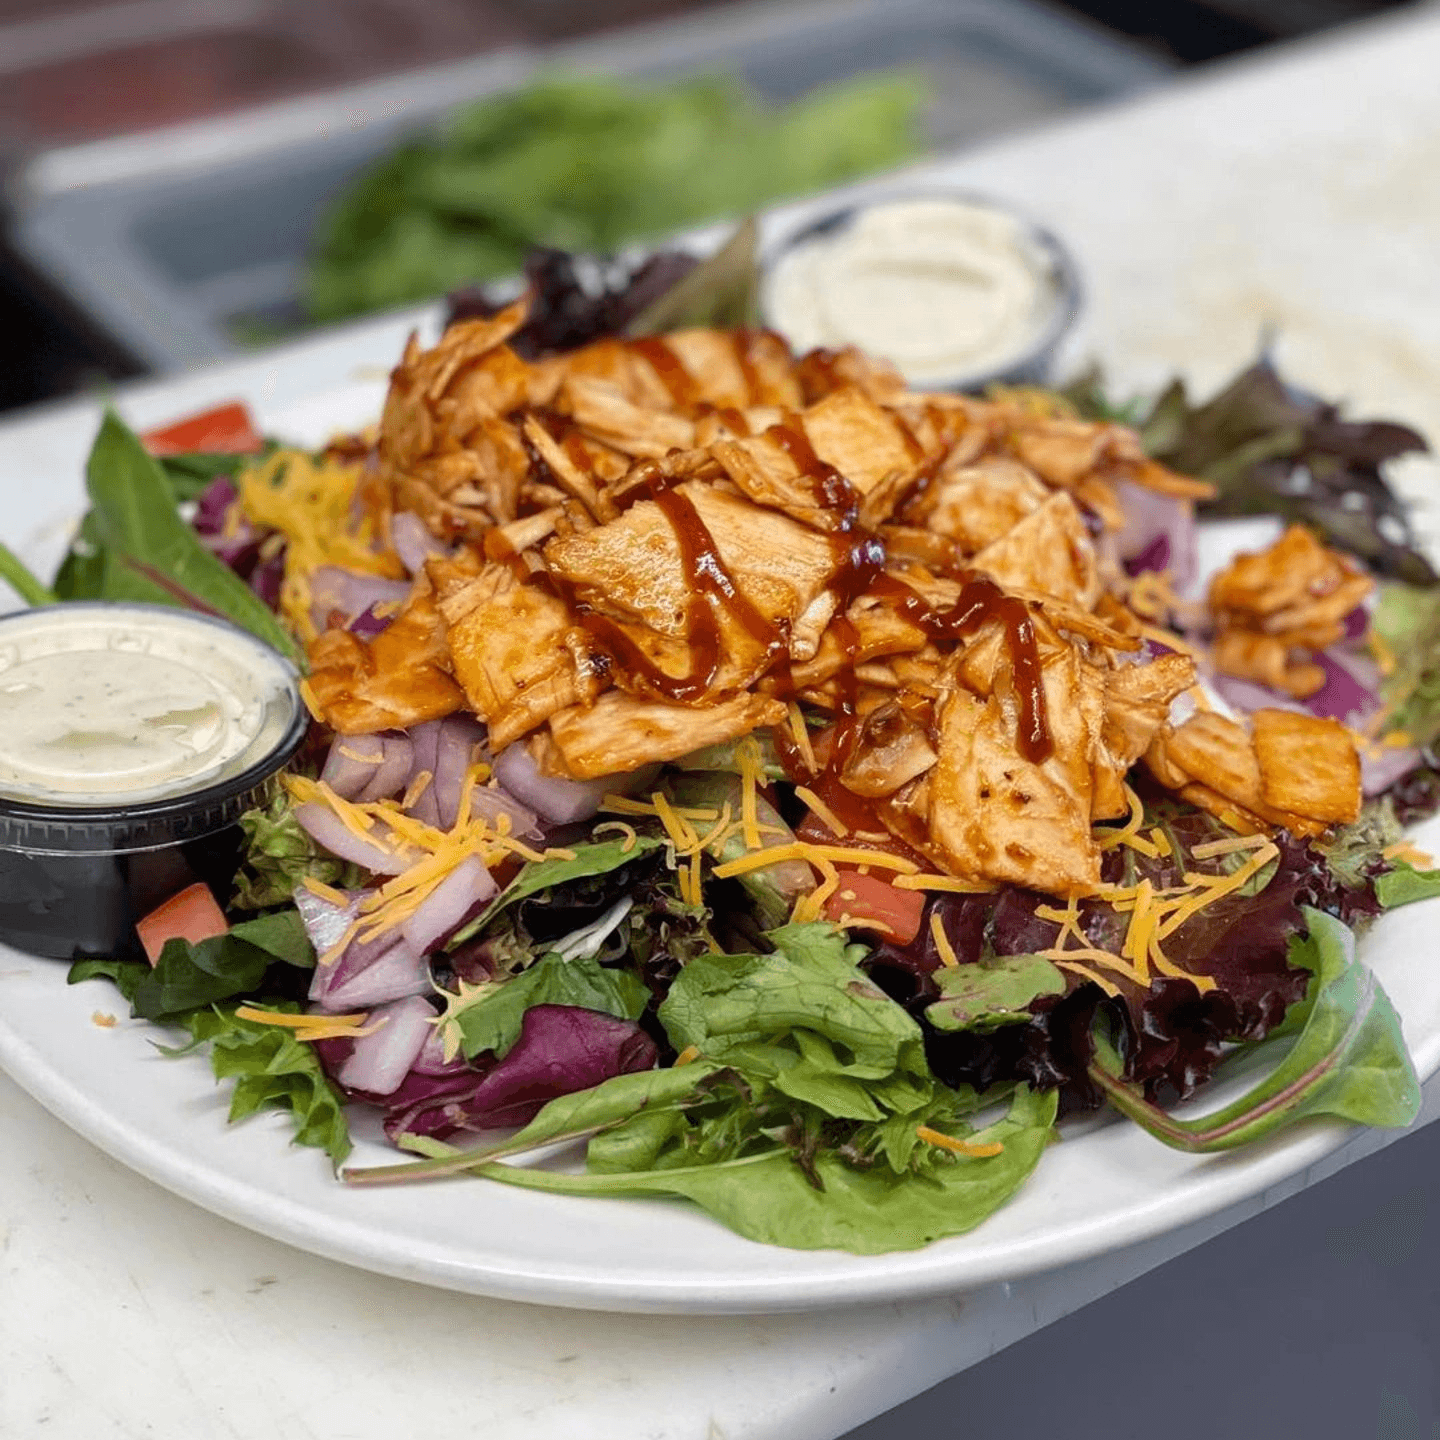 Our Mouthwatering BBQ Chicken Salad! 🥗🔥